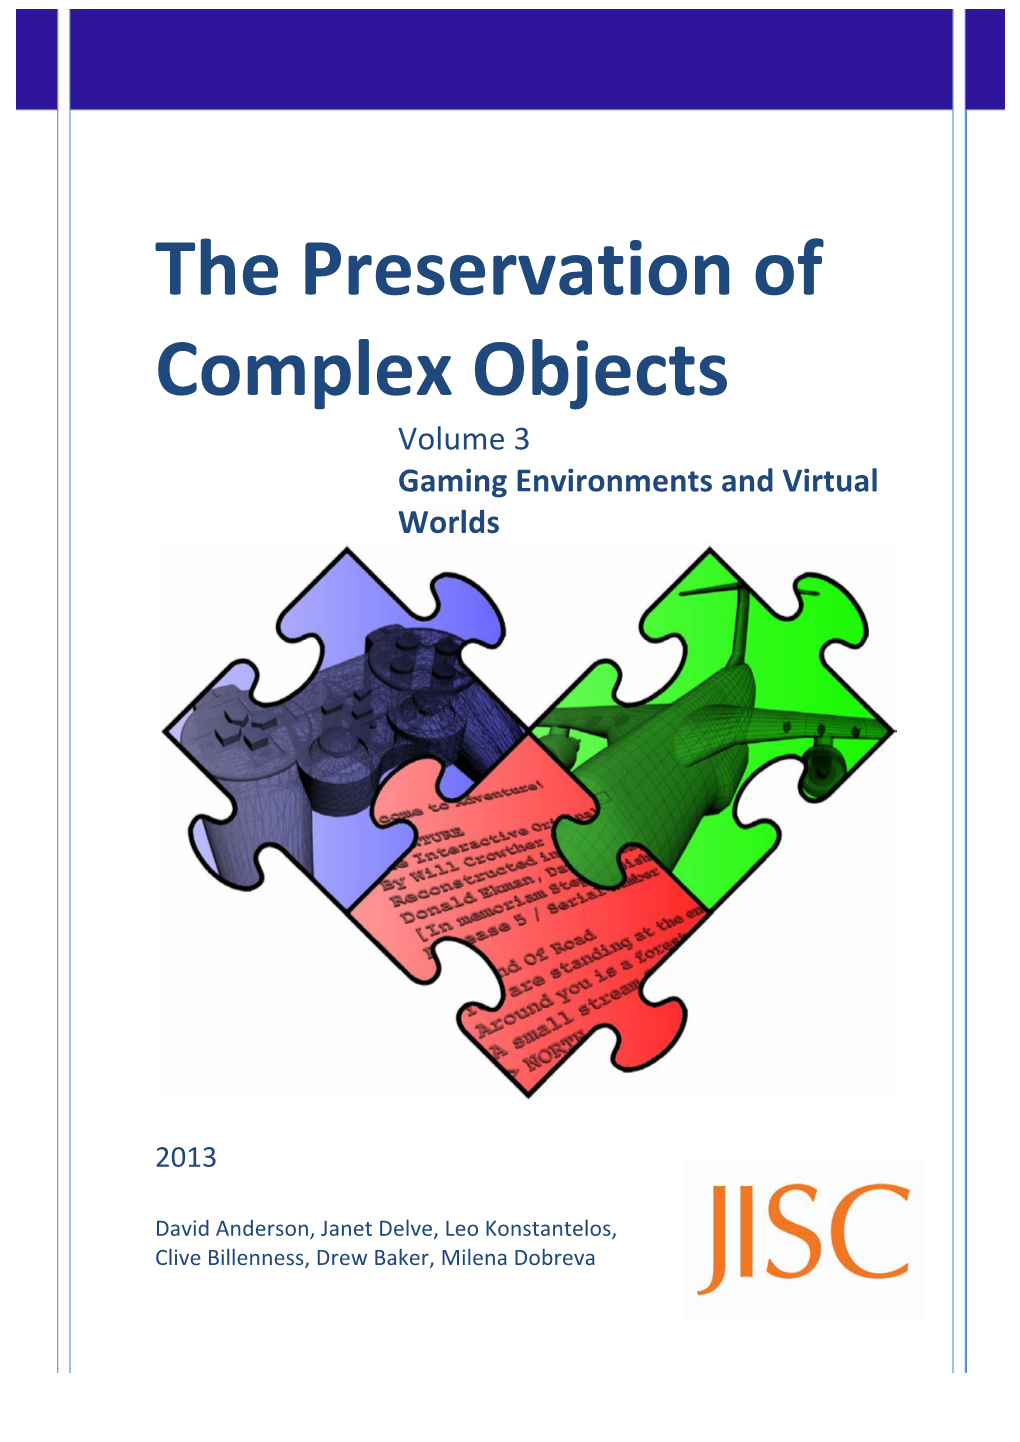 The Preservation of Complex Objects Volume 3 Gaming Environments and Virtual Worlds